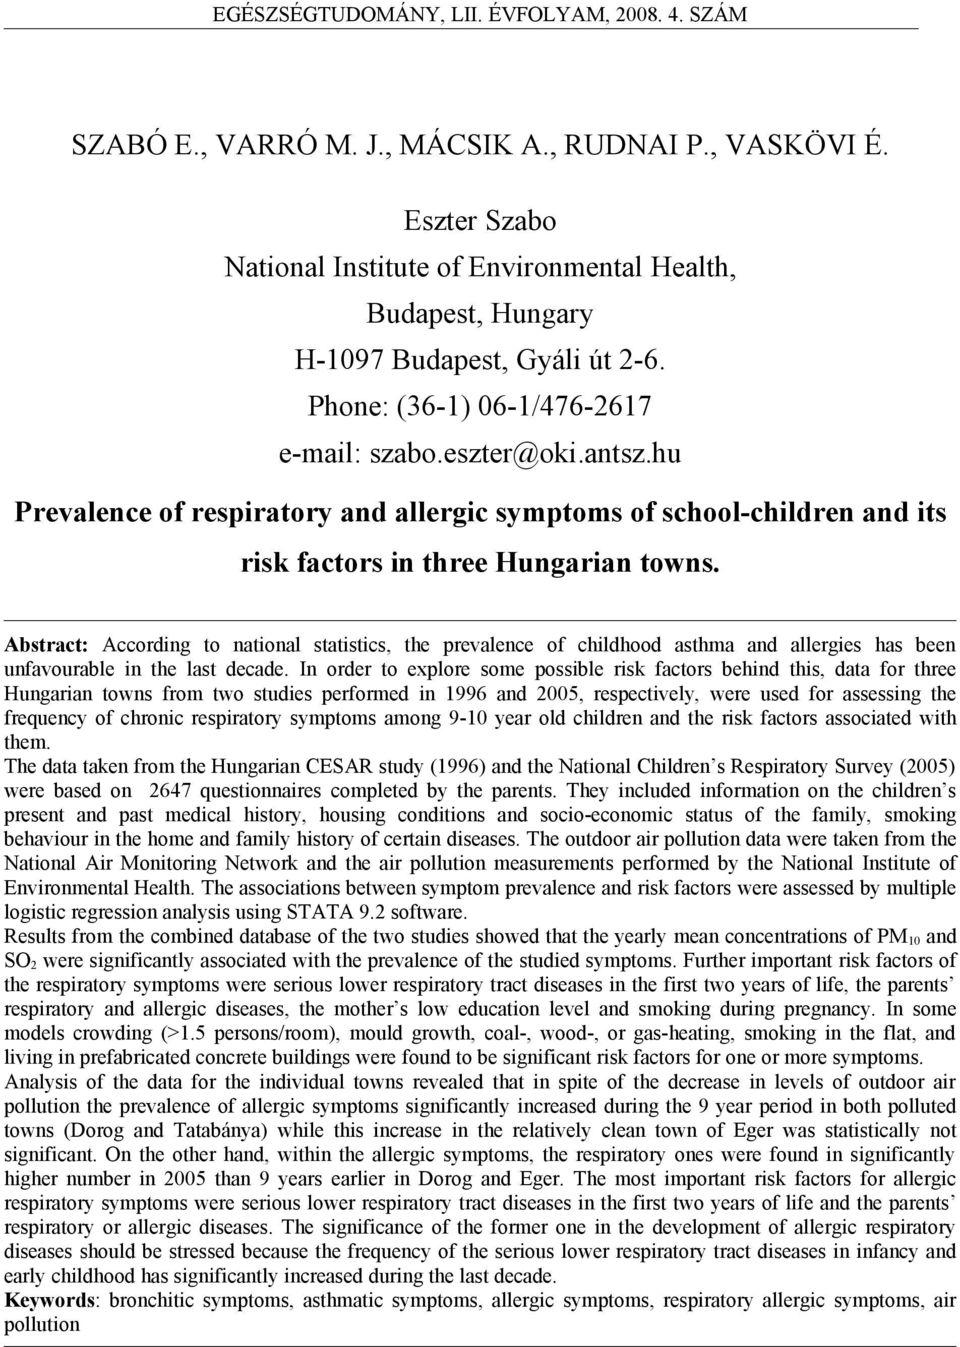 Abstract: According to national statistics, the prevalence of childhood asthma and allergies has been unfavourable in the last decade.